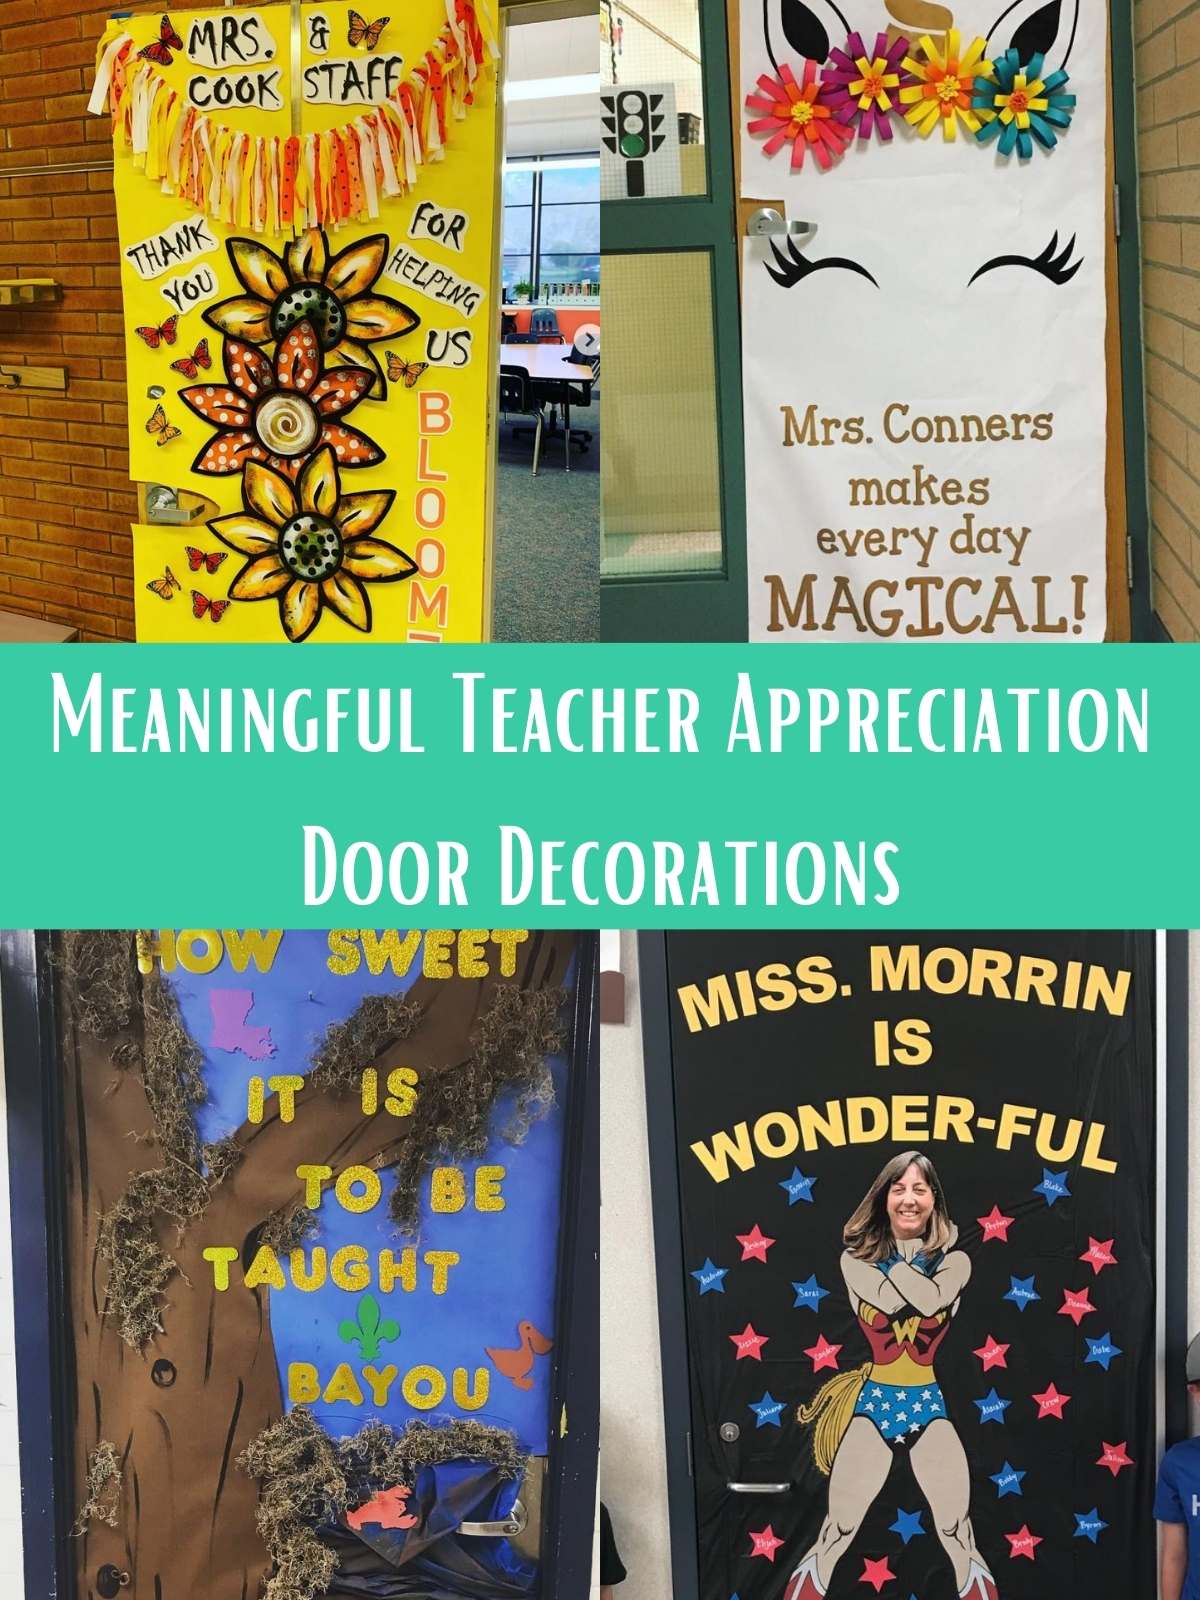 Meaningful Teacher Appreciation Door Decorations. 4 Different doors with different themes.